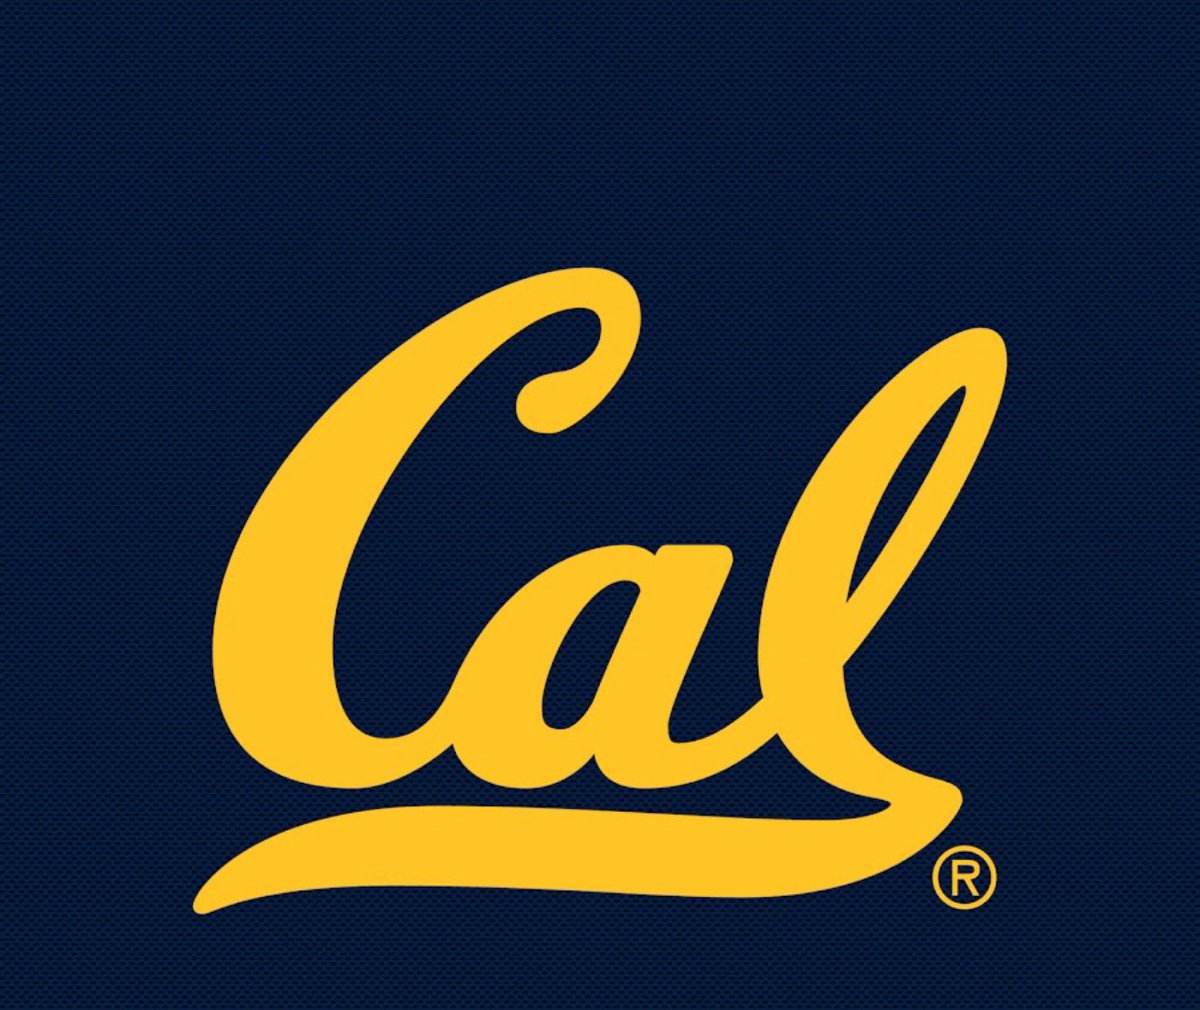 After a great conversation with @CoachToler I’m blessed to receive my first official D1 scholarship from @CalFootball #GoBears